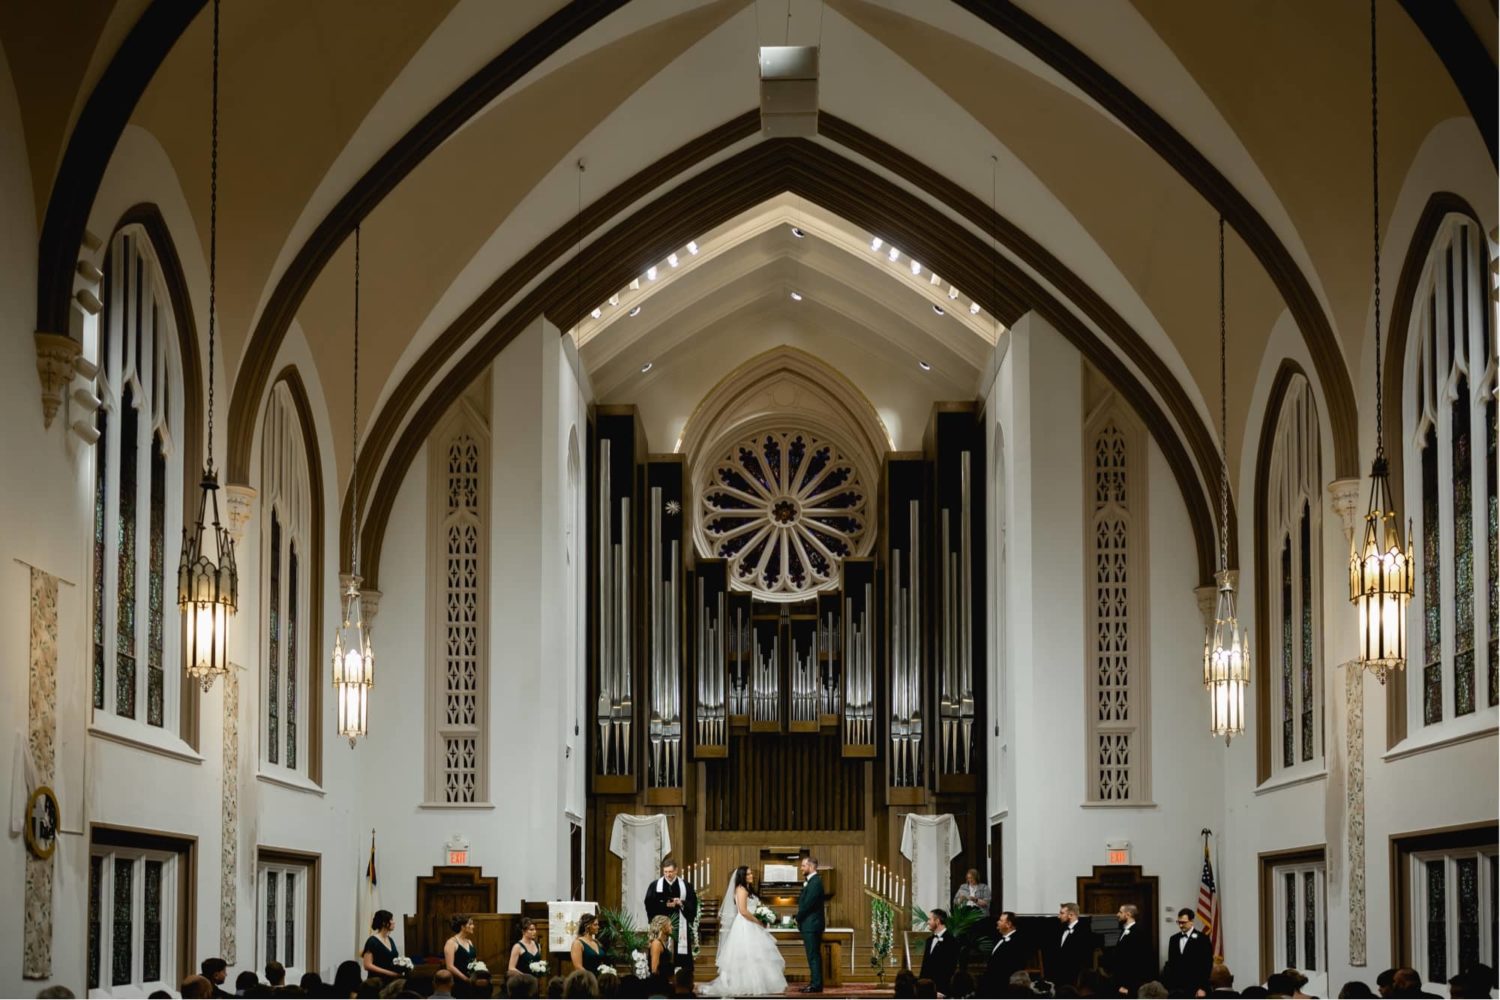 Beautiful wedding photos at Westminster Presbyterian Church in Des Moines Iowa